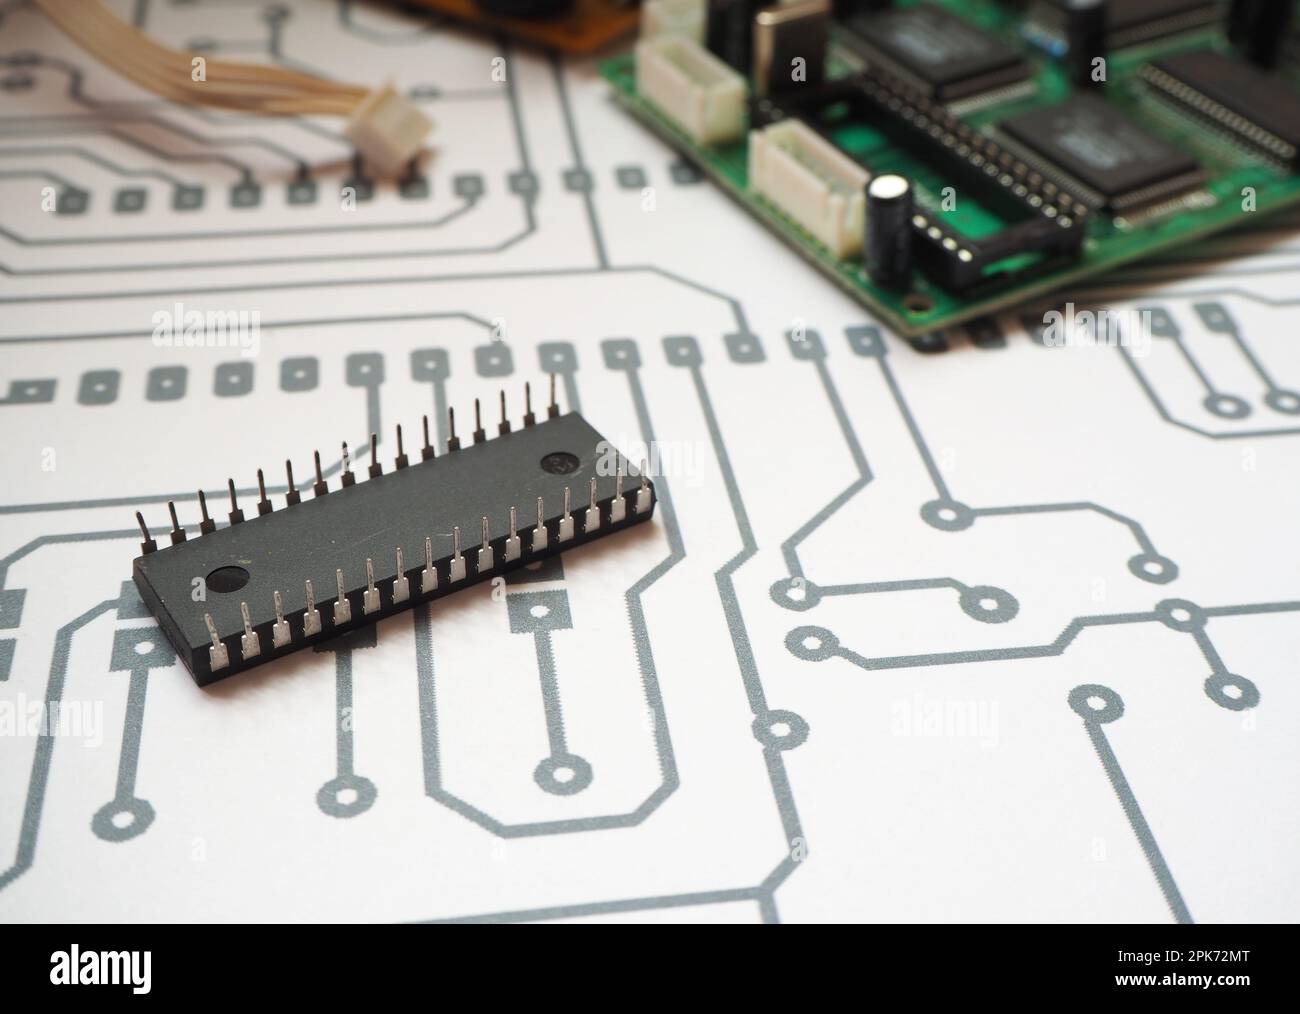 32 pins integrated circuit on the electronic diagram. Printed circuit board background. Stock Photo